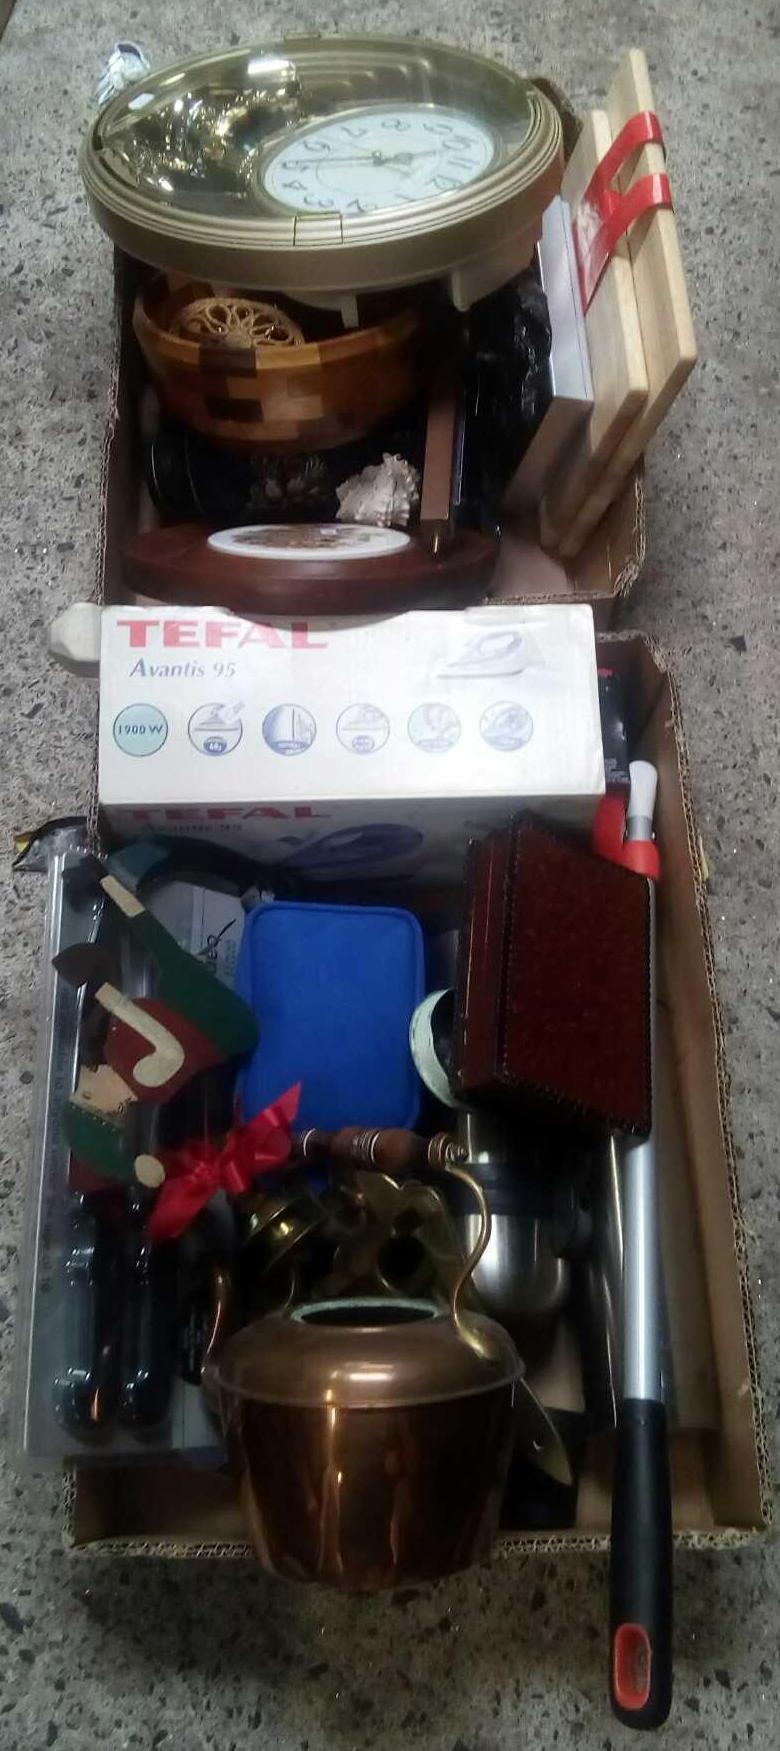 TWO CARTONS CONTAINING A COPPER KETTLE, CHOPPING BOARDS, CLOCKS, TEFAL IRON & THERMOS FLASK